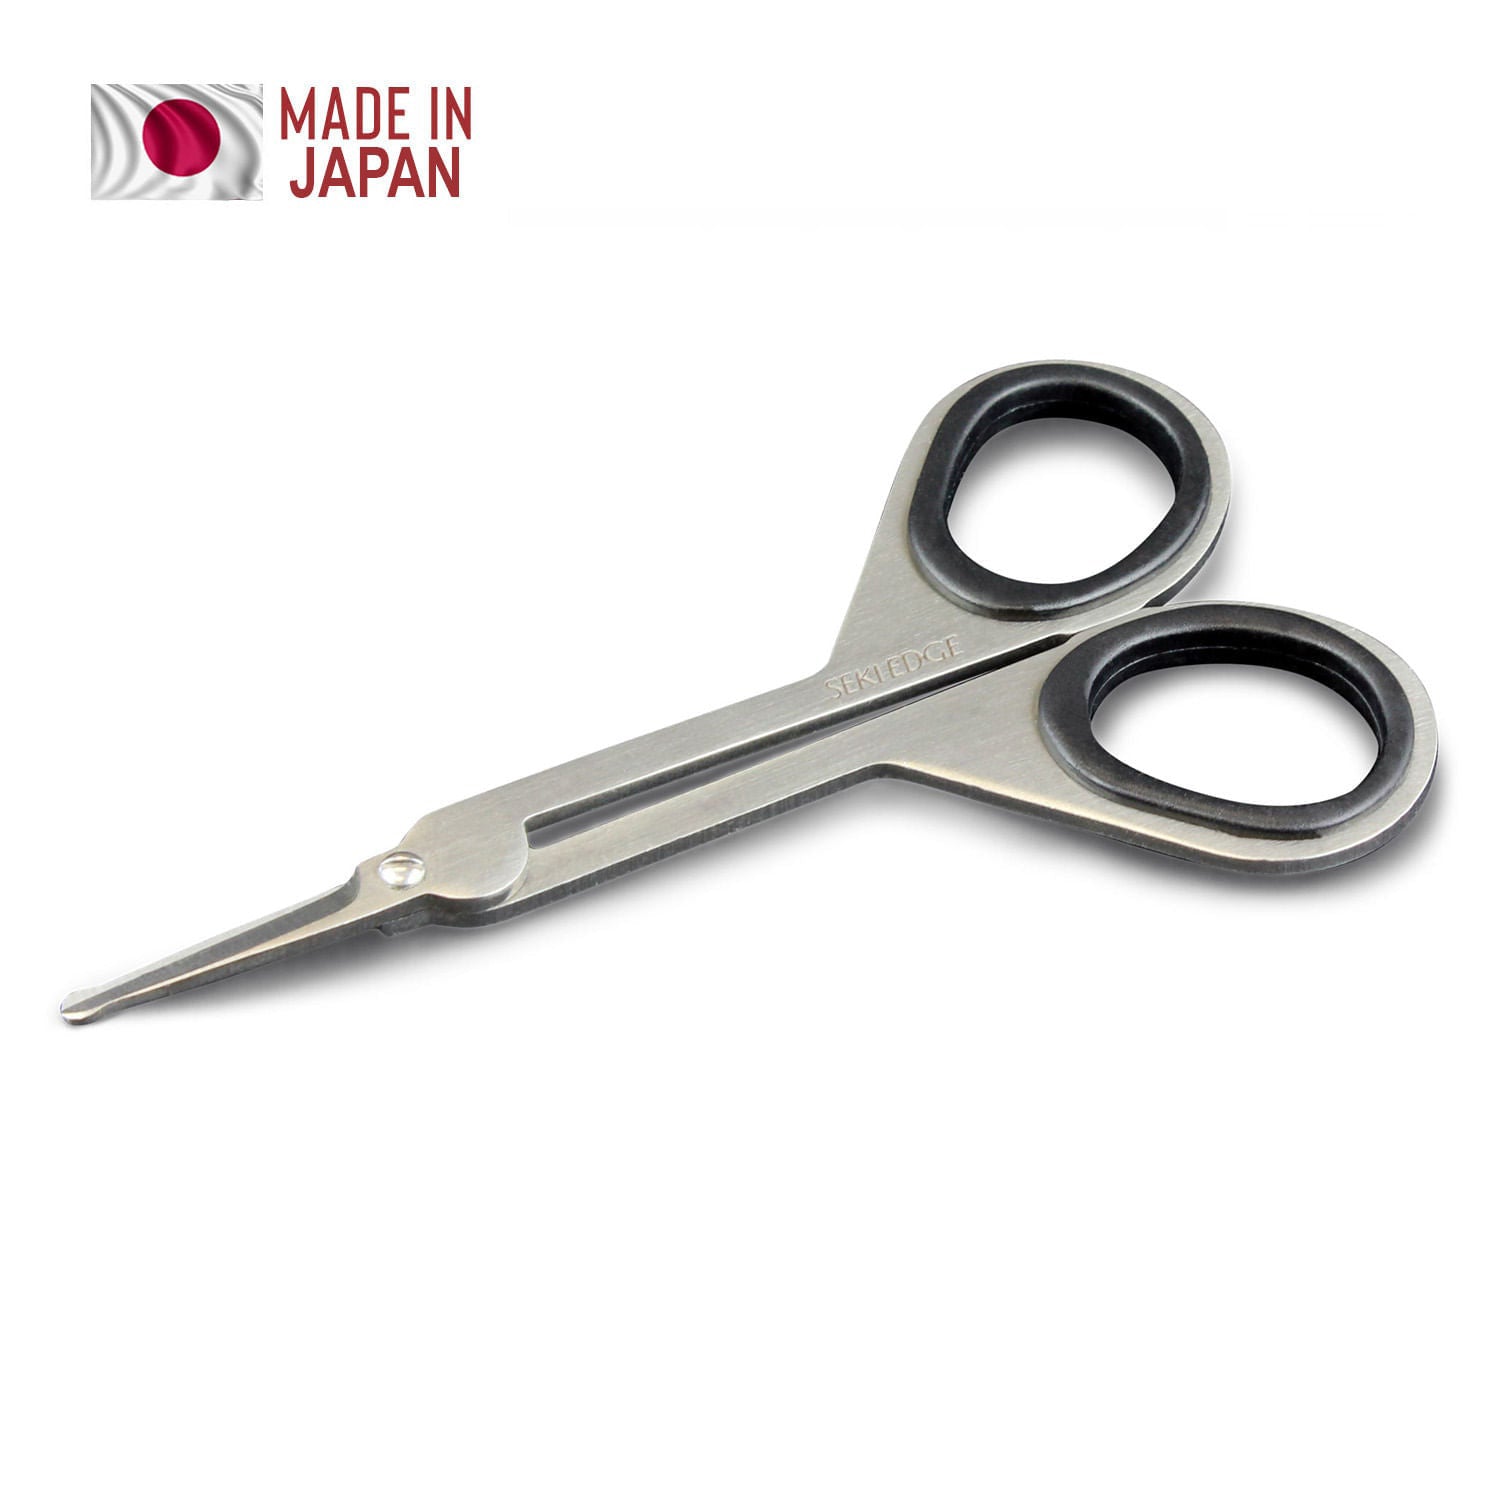 Seki Edge Stainless Steel Safety Nostril Hair Trimming Scissors SS-908